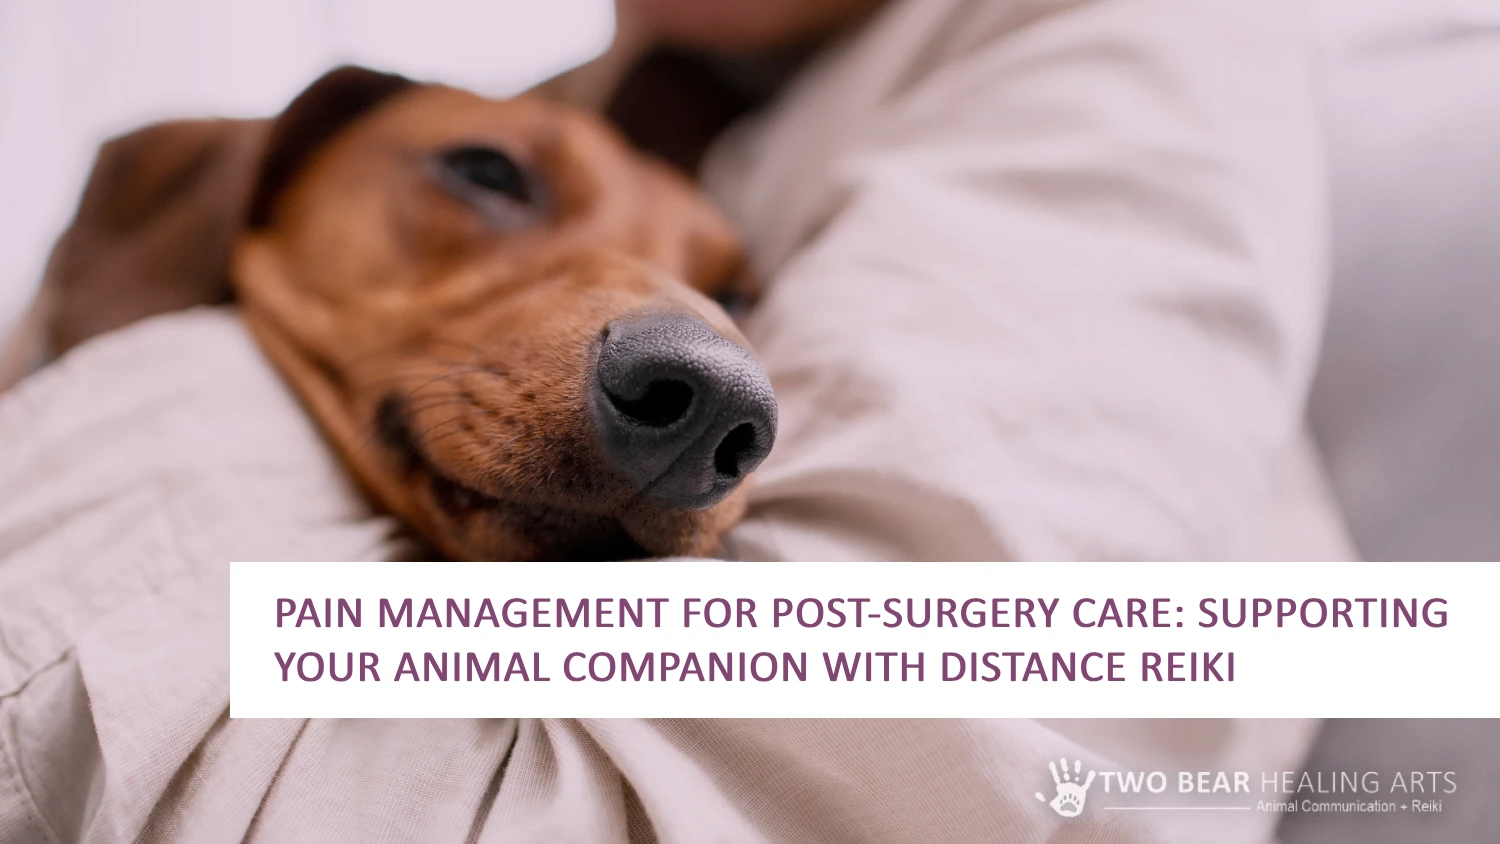 Helping your pet find comfort. Image of an older dog resting on its owner's lap. Learn about pain management options to improve your pet's quality of life.